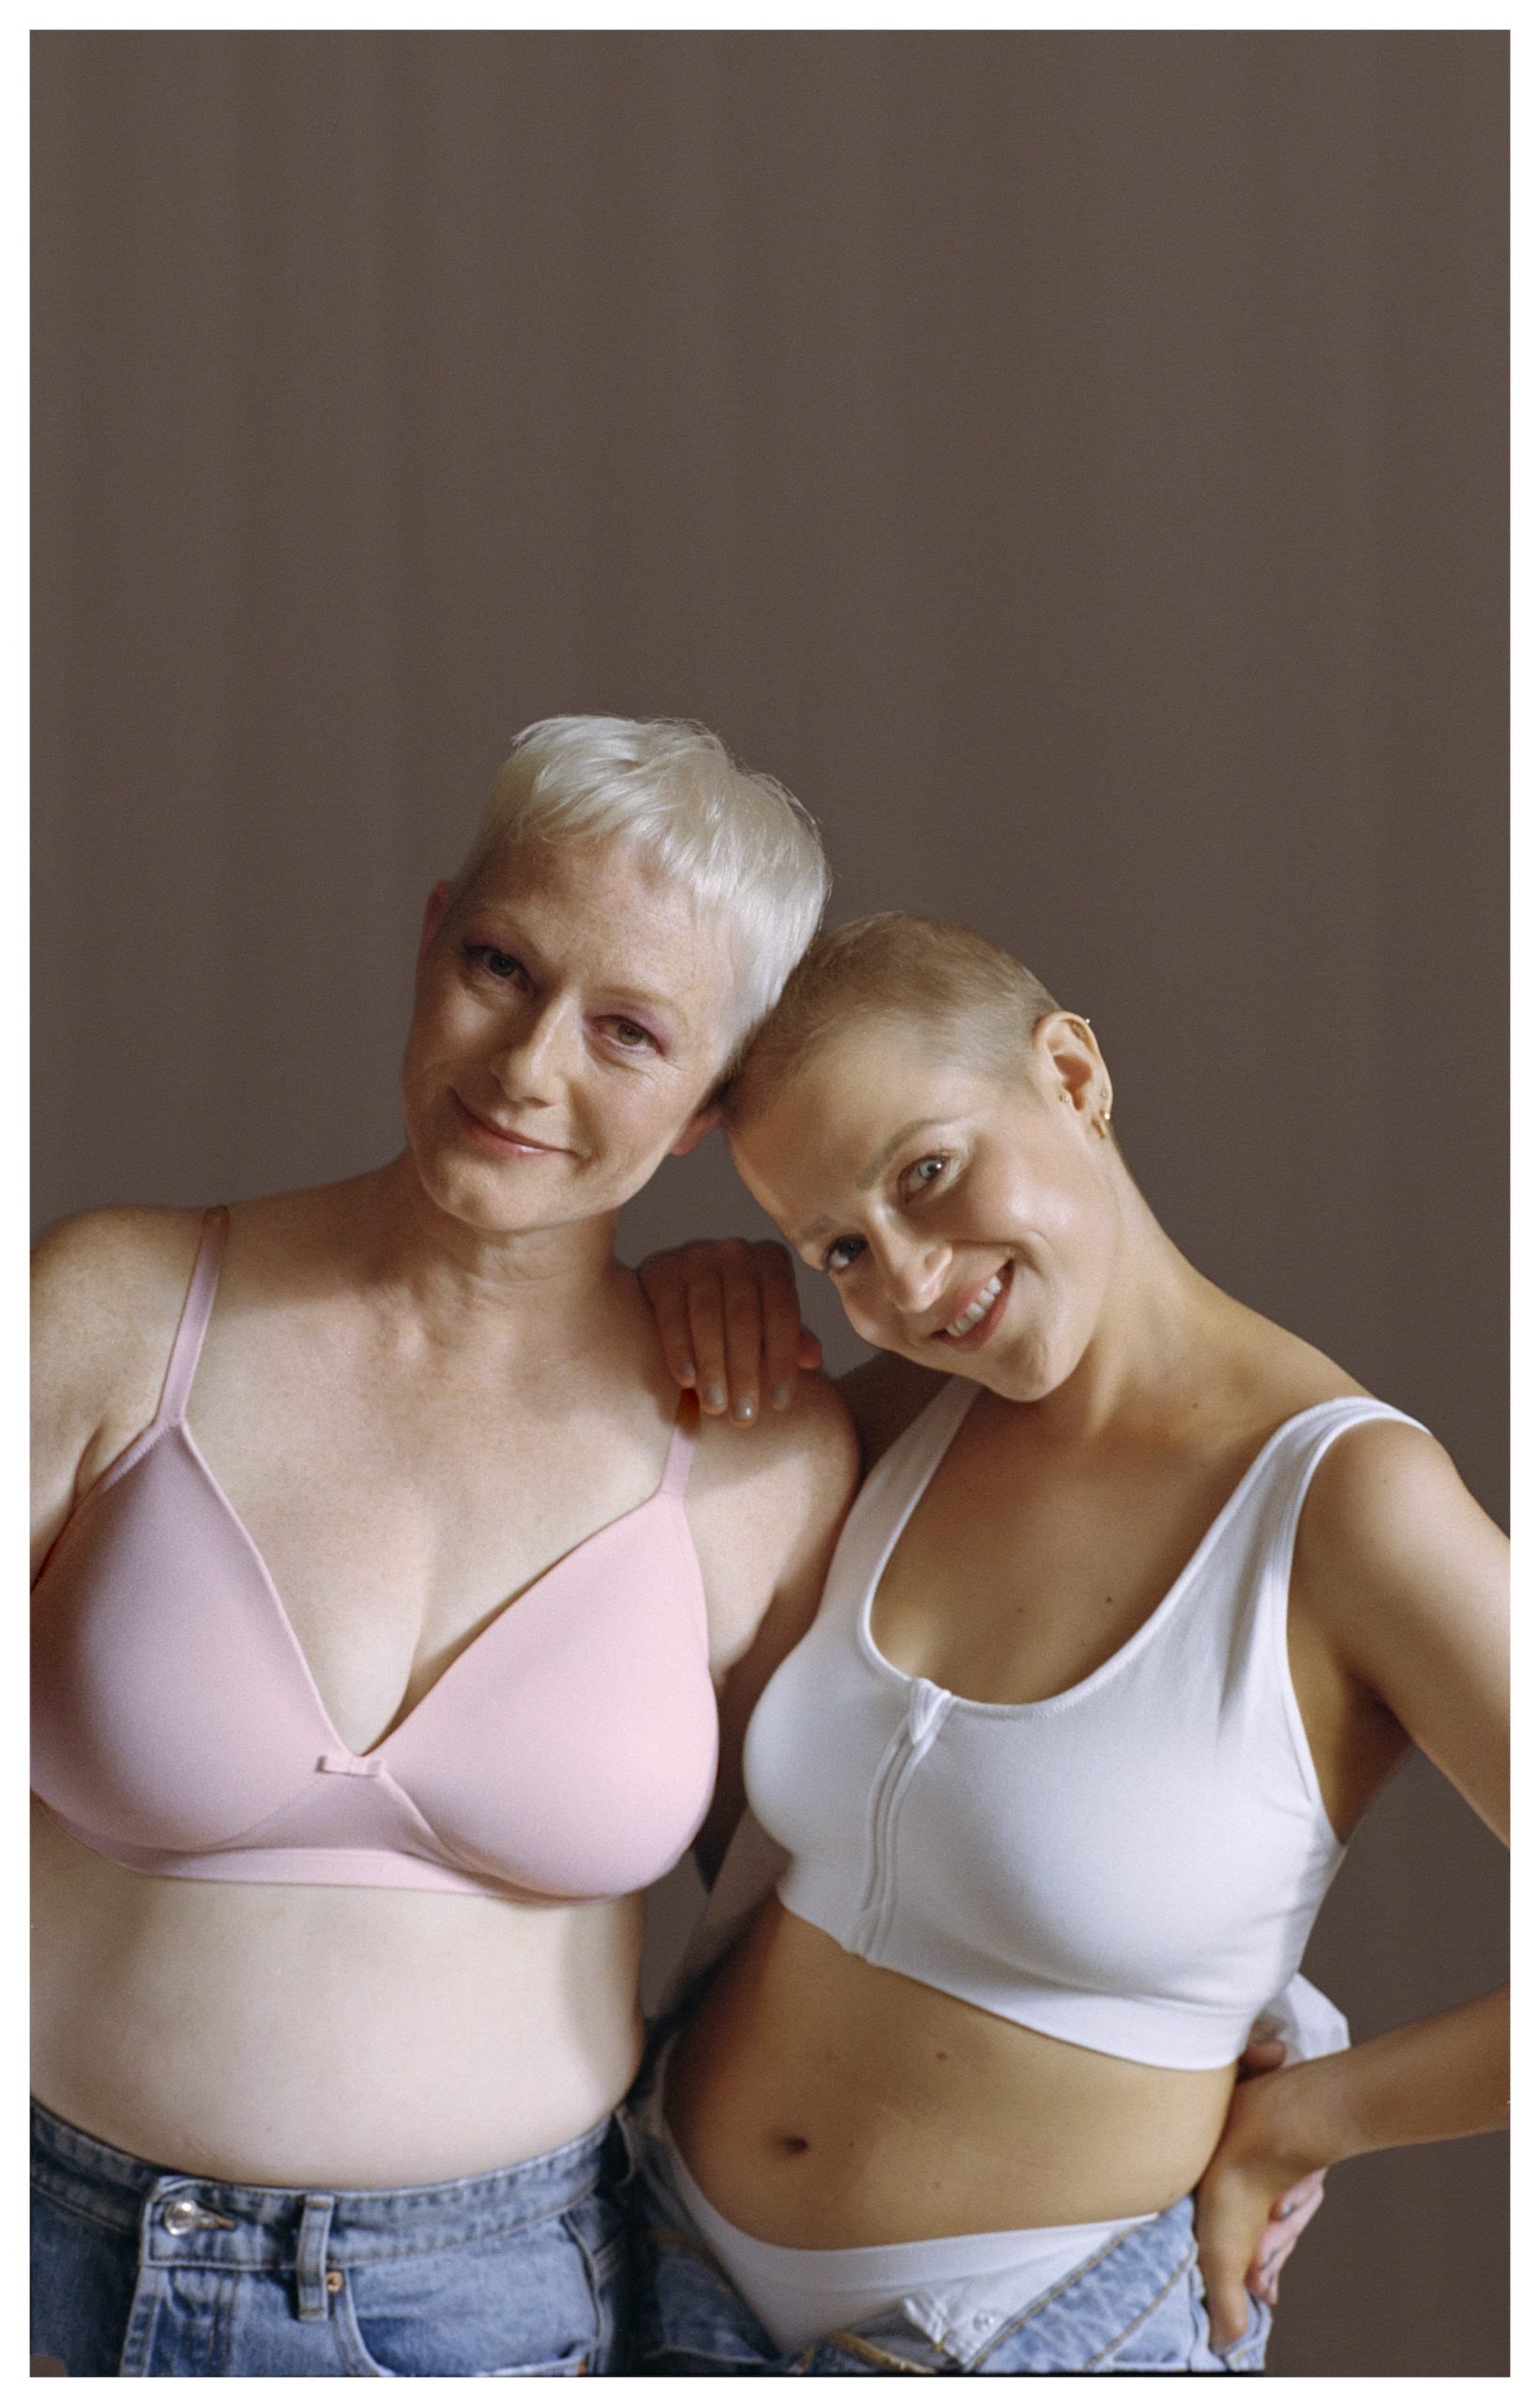 Our Breast Cancer Awareness, Post-Surgery Lingerie and Solidarity